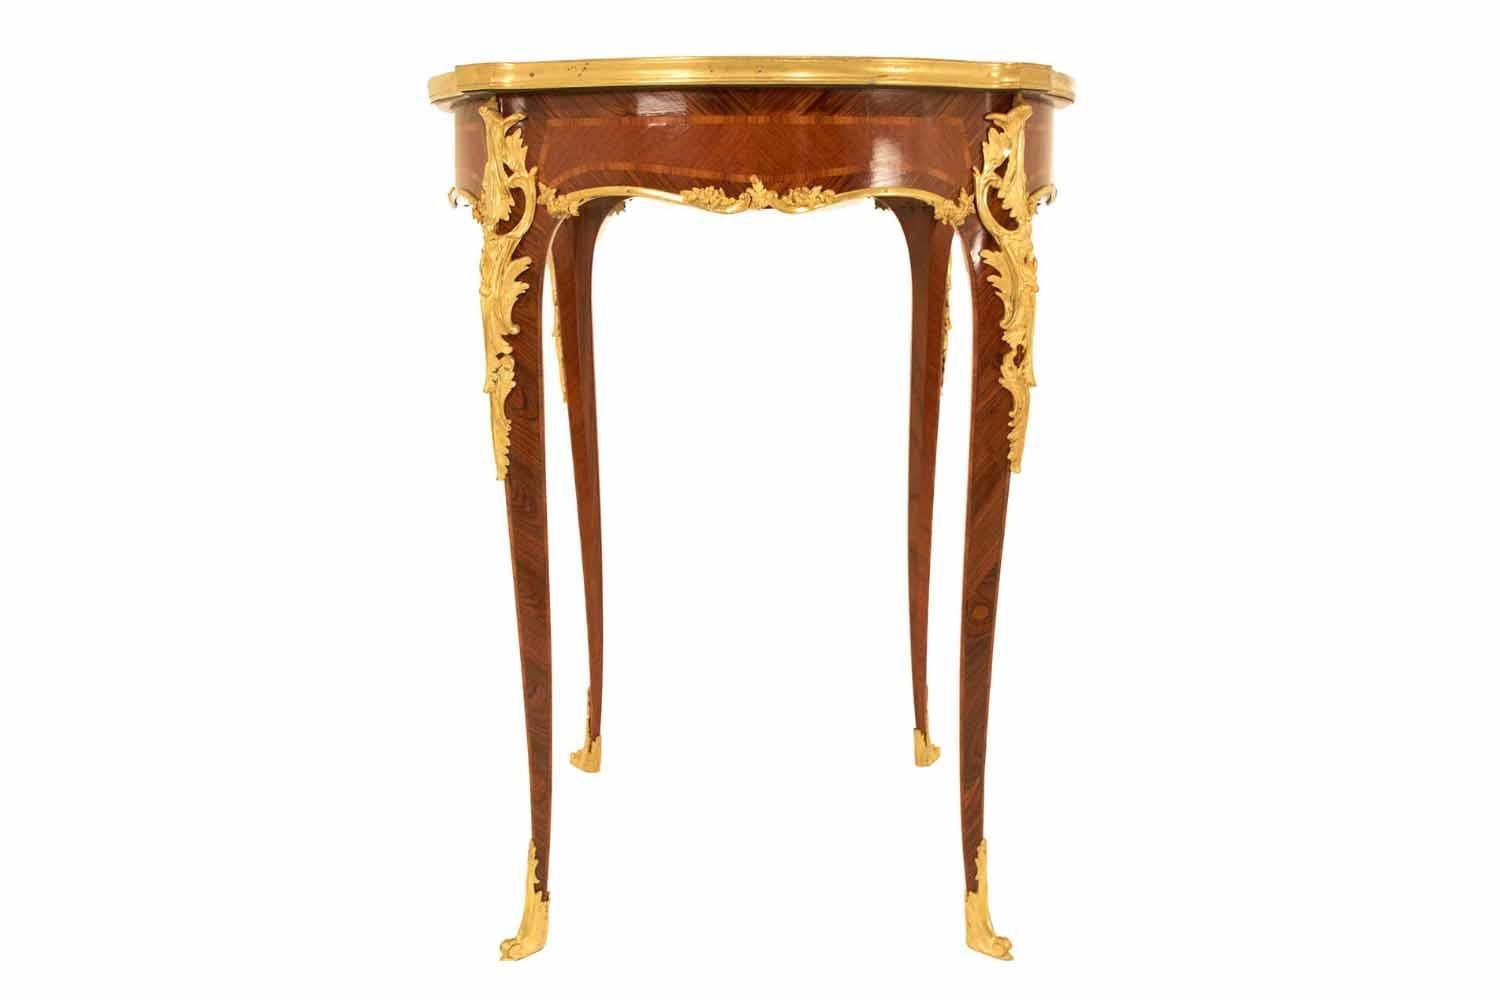 Louis XV style tulipwood and kingwood marquetry pedestal table, in the manner of the Maison Sormani. It has four curved legs decorated with chiseled gilt bronzes on shoes and angles.
The curved apron is decorated by a framed marquetry and chiseled